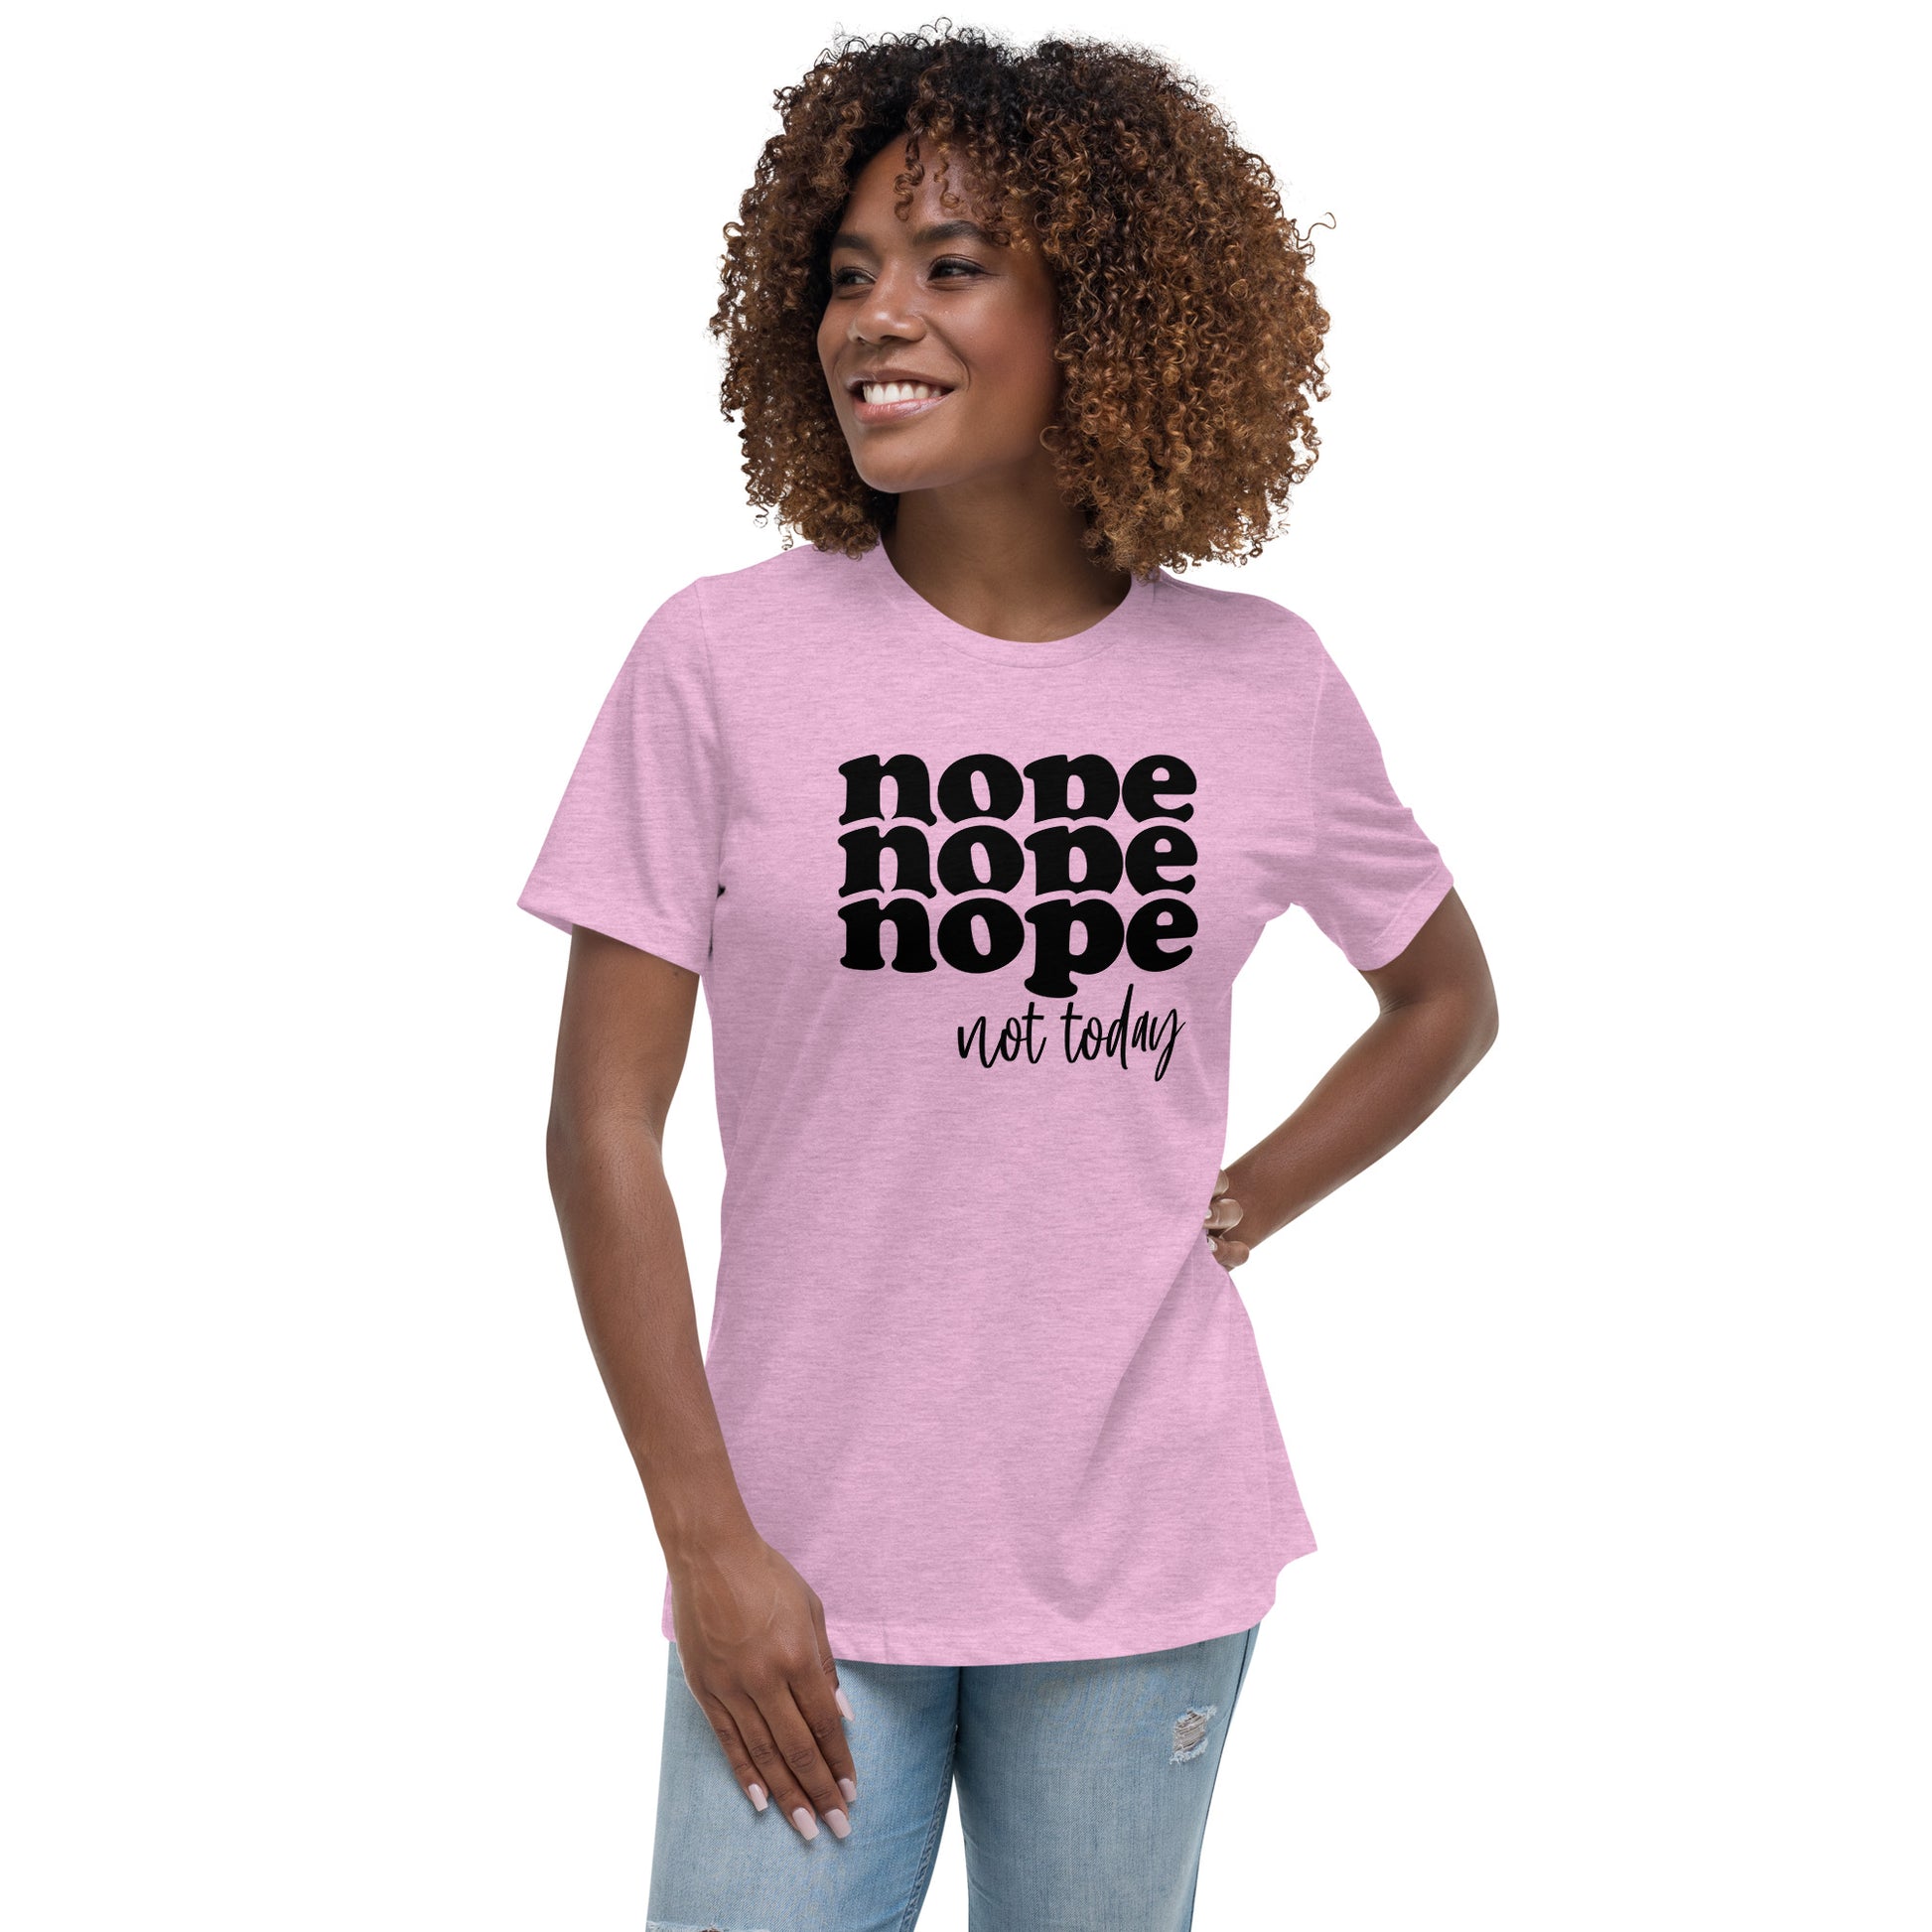 Nope Nope Nope Not Today Women's Relaxed T-Shirt CedarHill Country Market